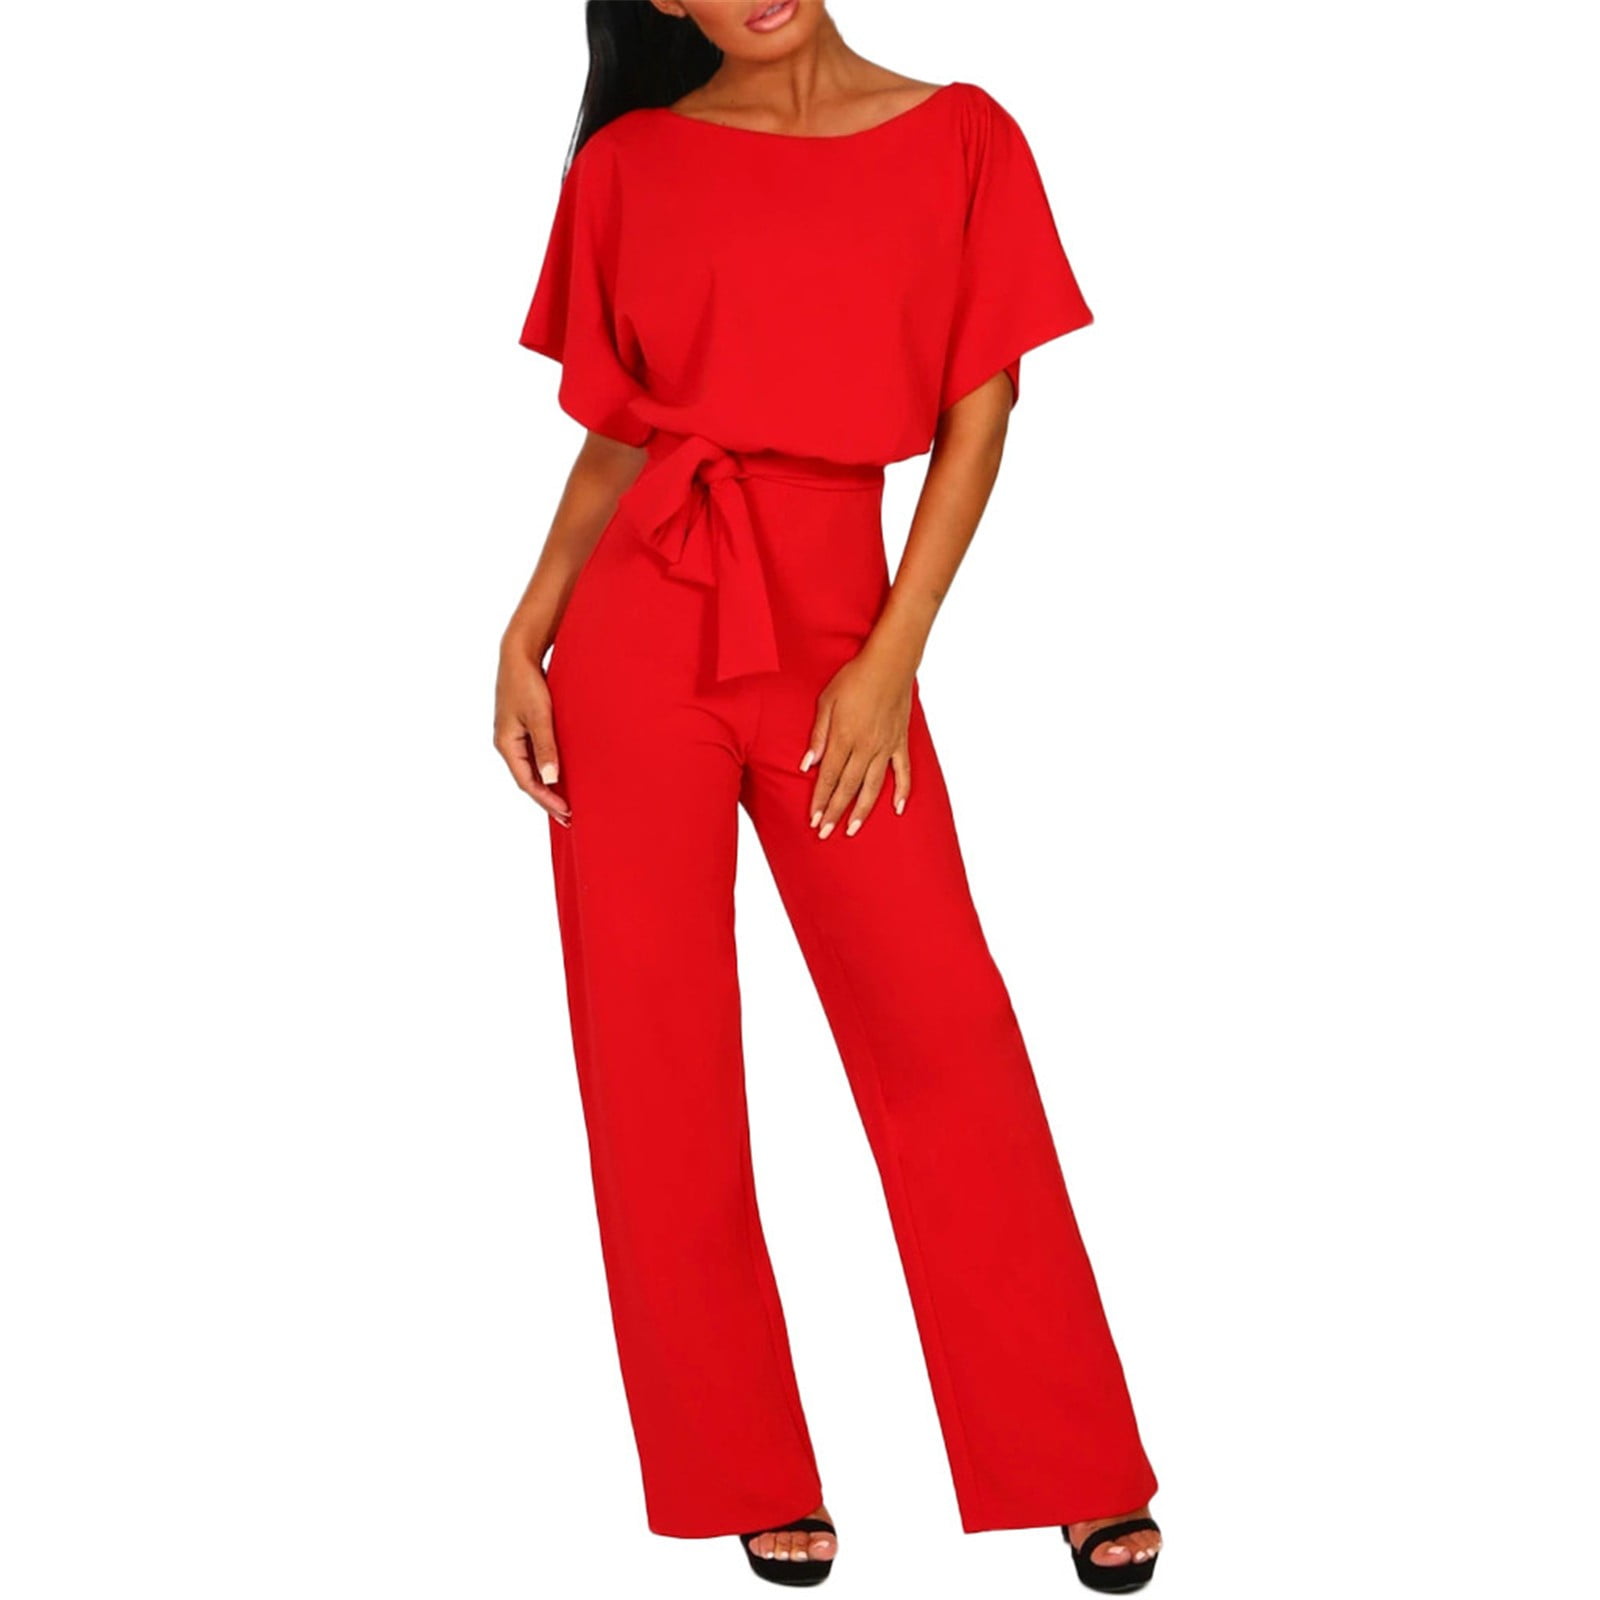 Alrise Red Romper Trousers Casual Women's Summer Casual Tie Round Neck Jumpsuit Solid Short Sleeve Jumpsuit, 3XL - Walmart.com